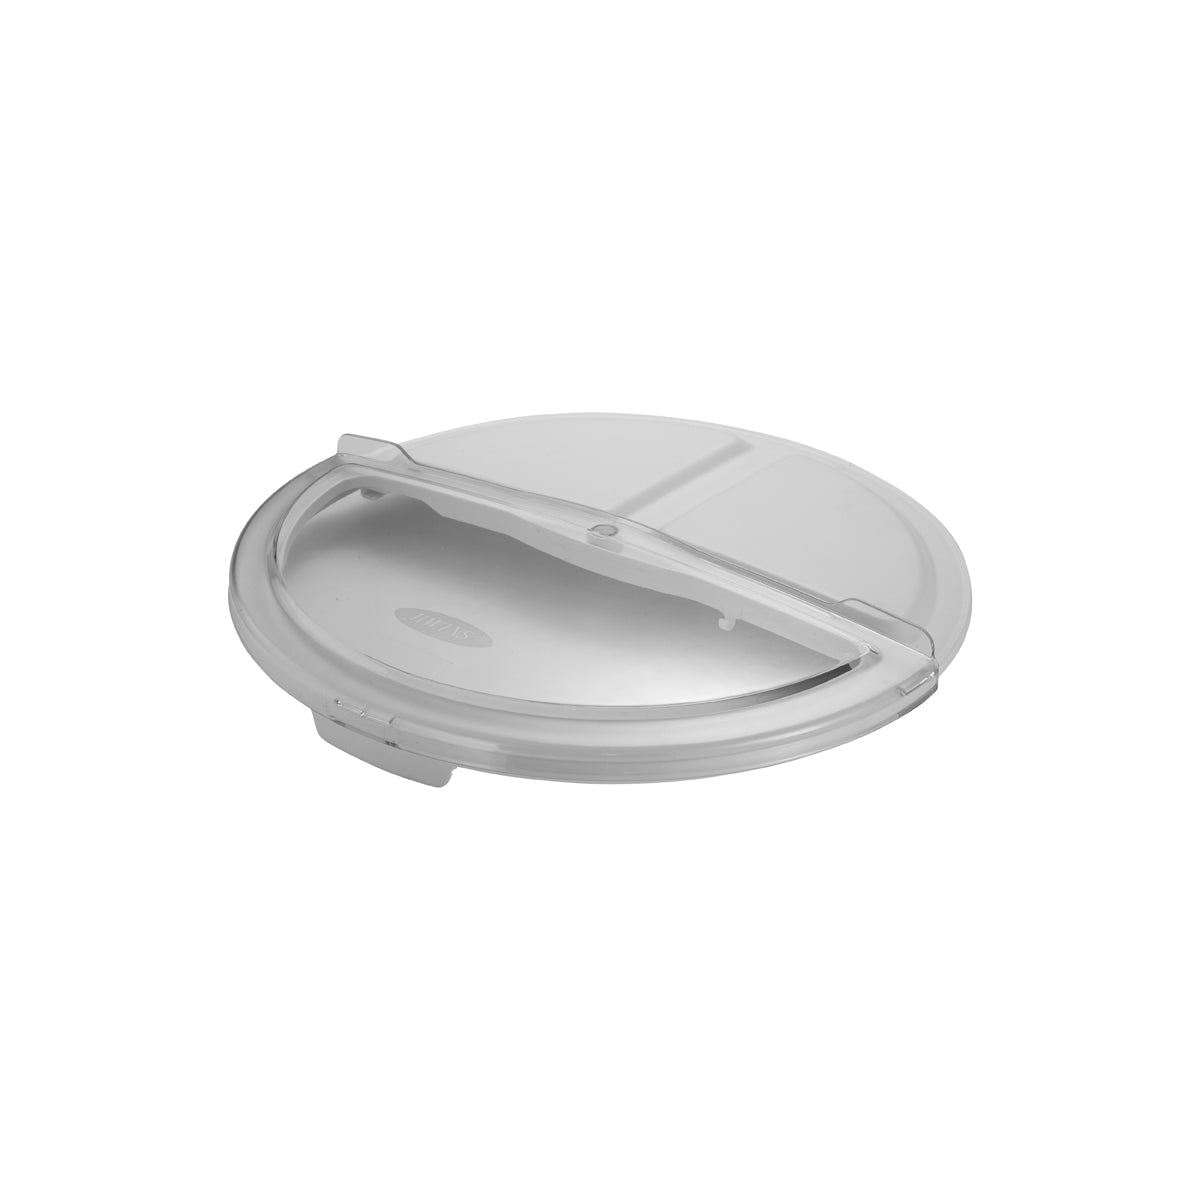 JW-CRCS120 Jiwins Sliding Lid to Suit 121Lt Round Ingredient Container Tomkin Australia Hospitality Supplies